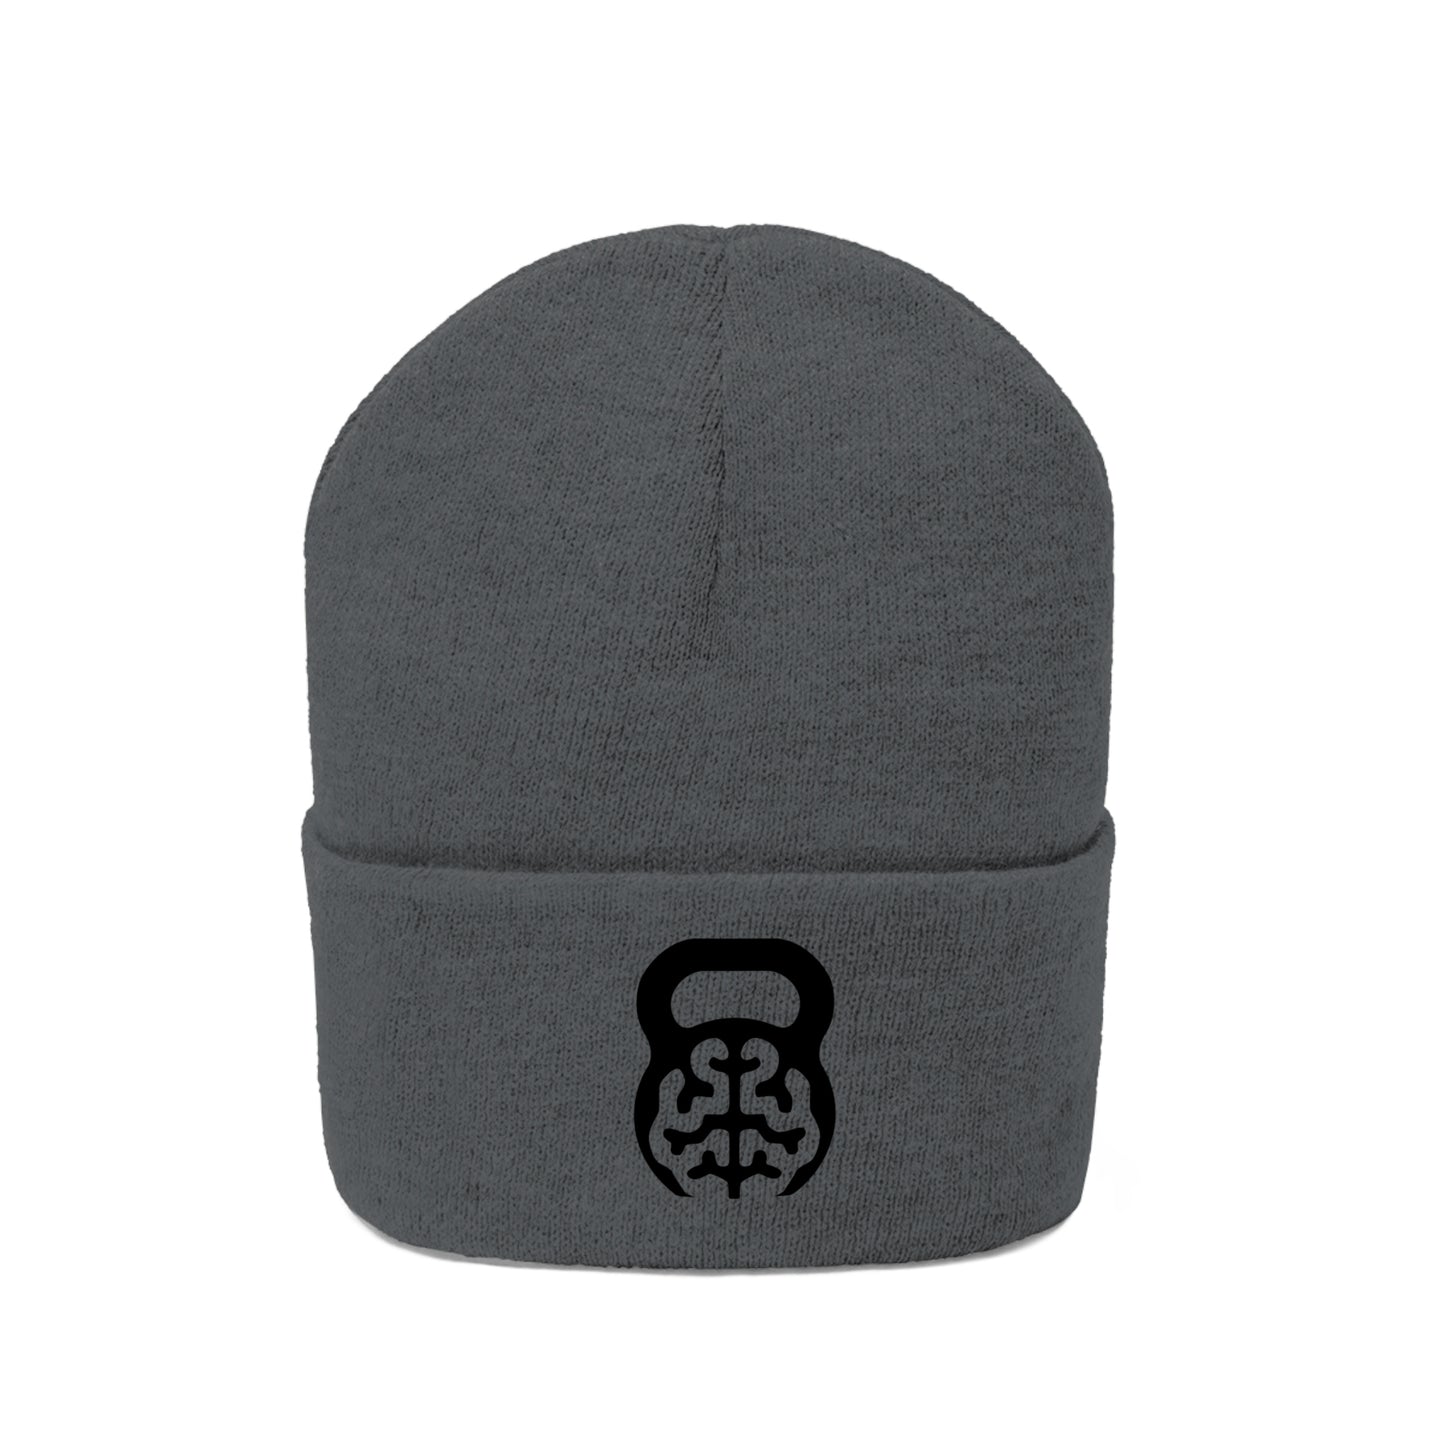 IDology Embroidered Knit Beanie